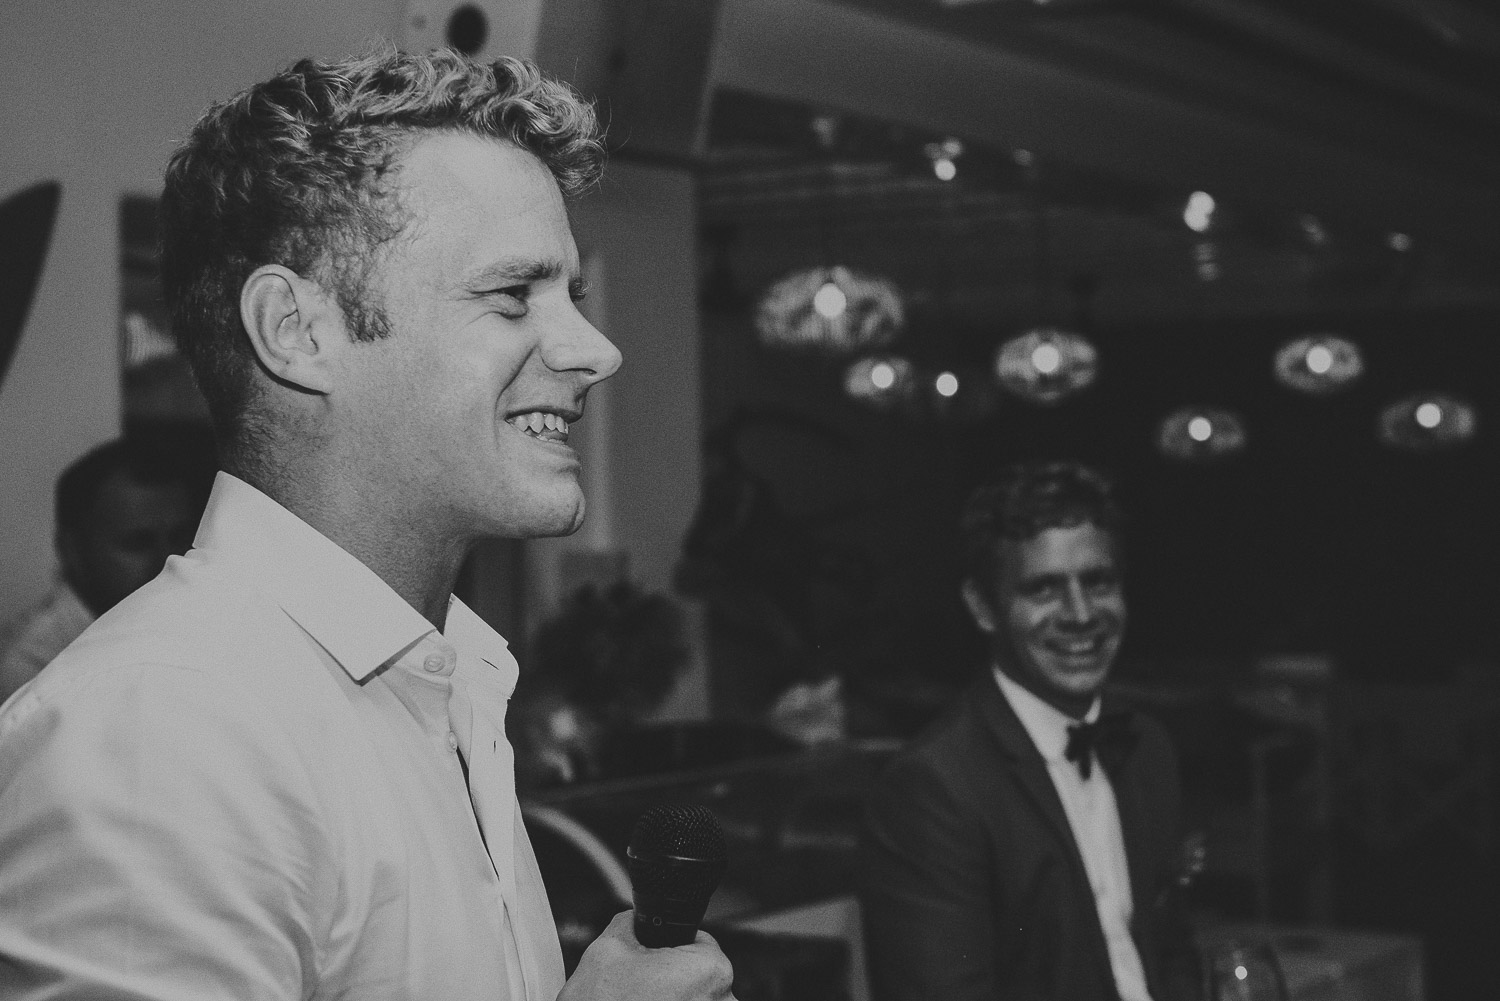 Wedding photographer Mykonos: black and white photo of the groom laughing at Elia during Mykonos wedding speeches.